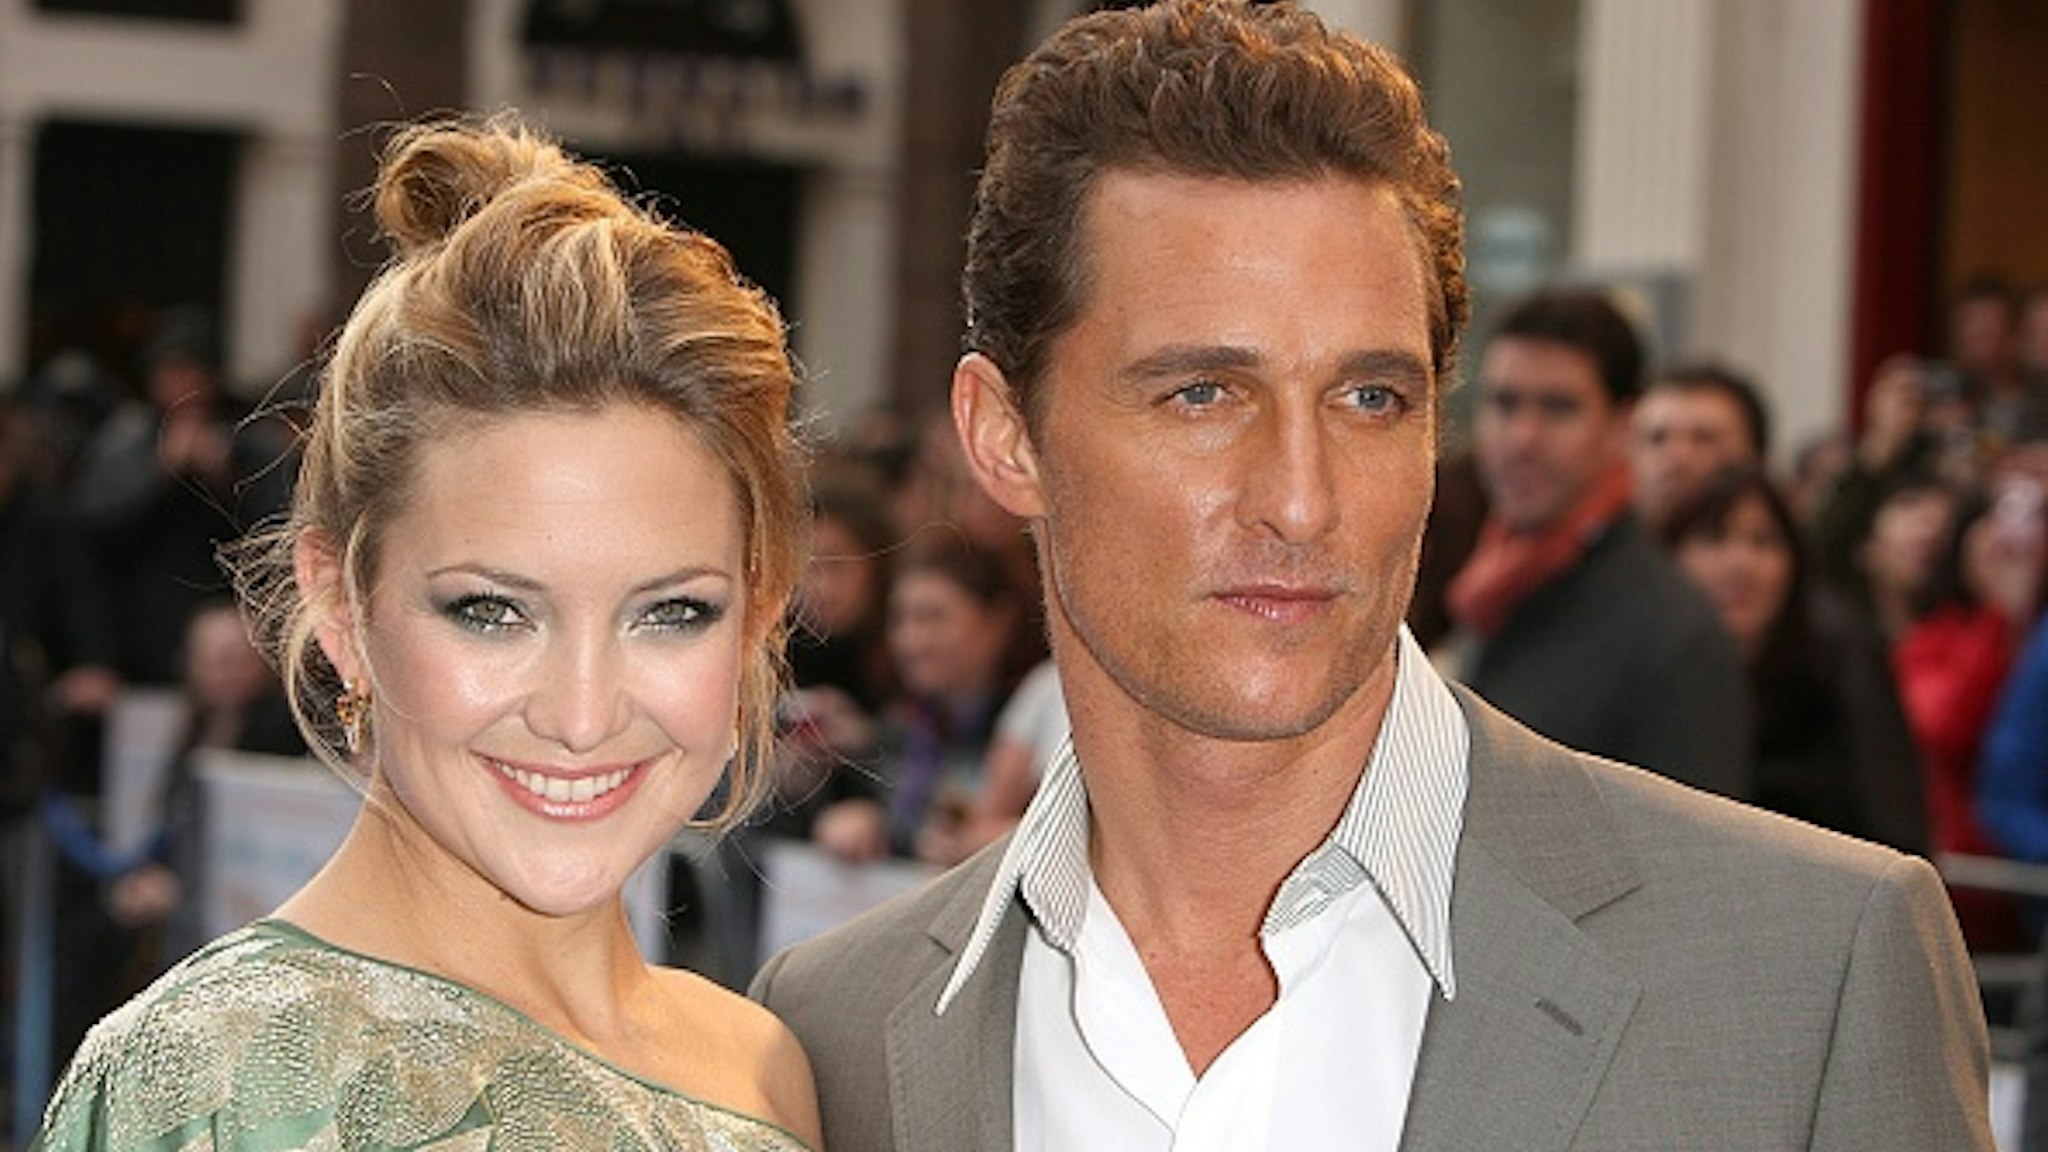 Matthew McConaughey and Kate Hudson arrive for the European Film Premiere of Fool's Gold at the Odeon Leicester Square, London, WC2.